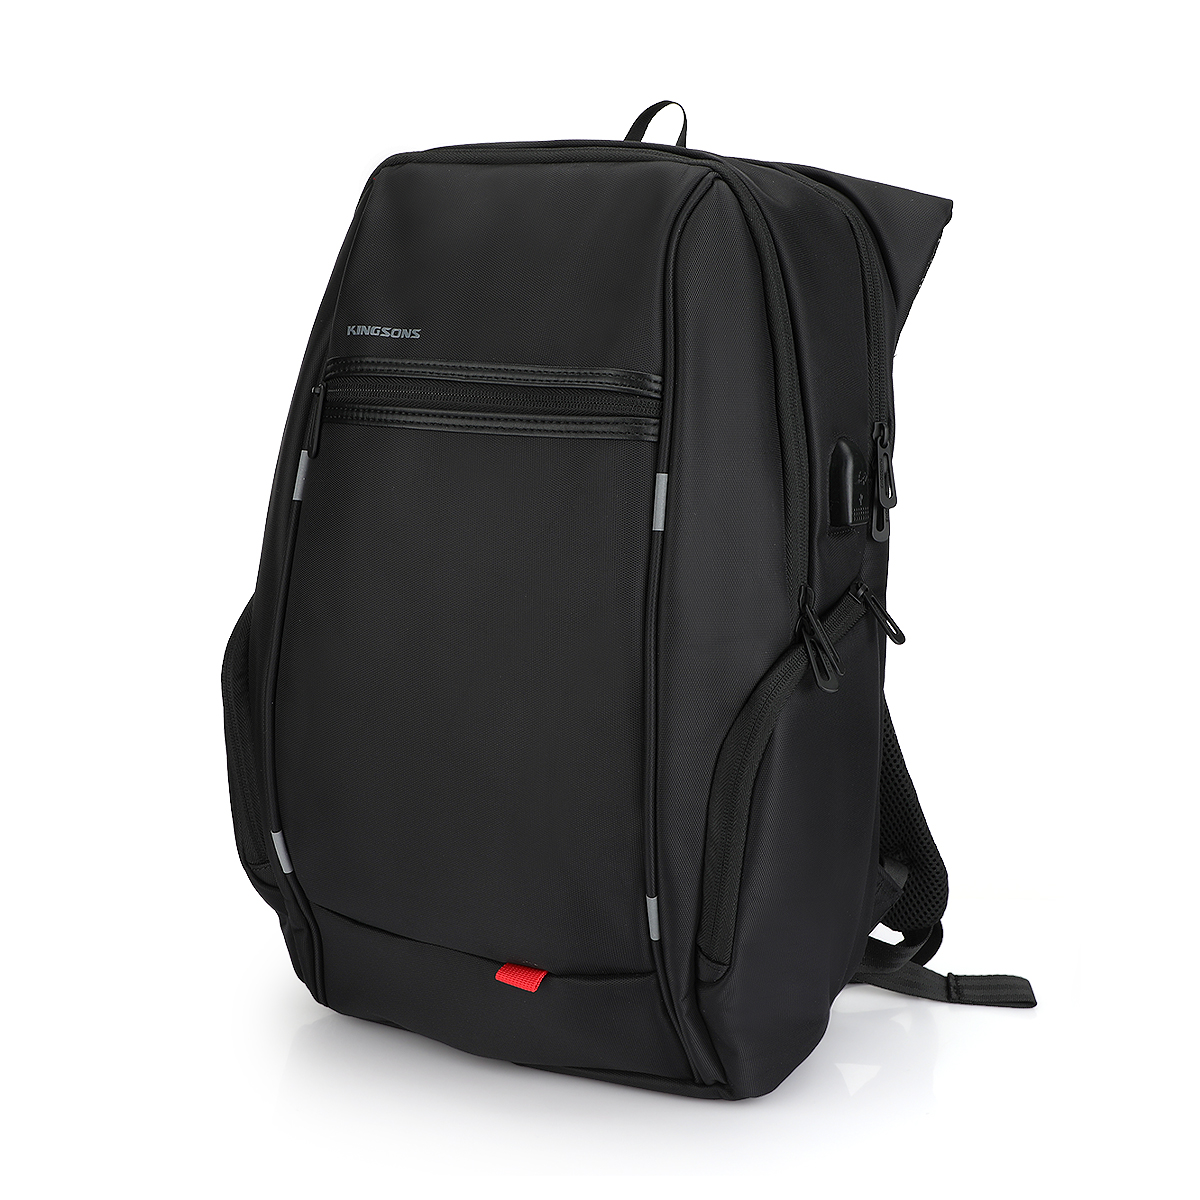 Kingsons  Charged Series Backpack